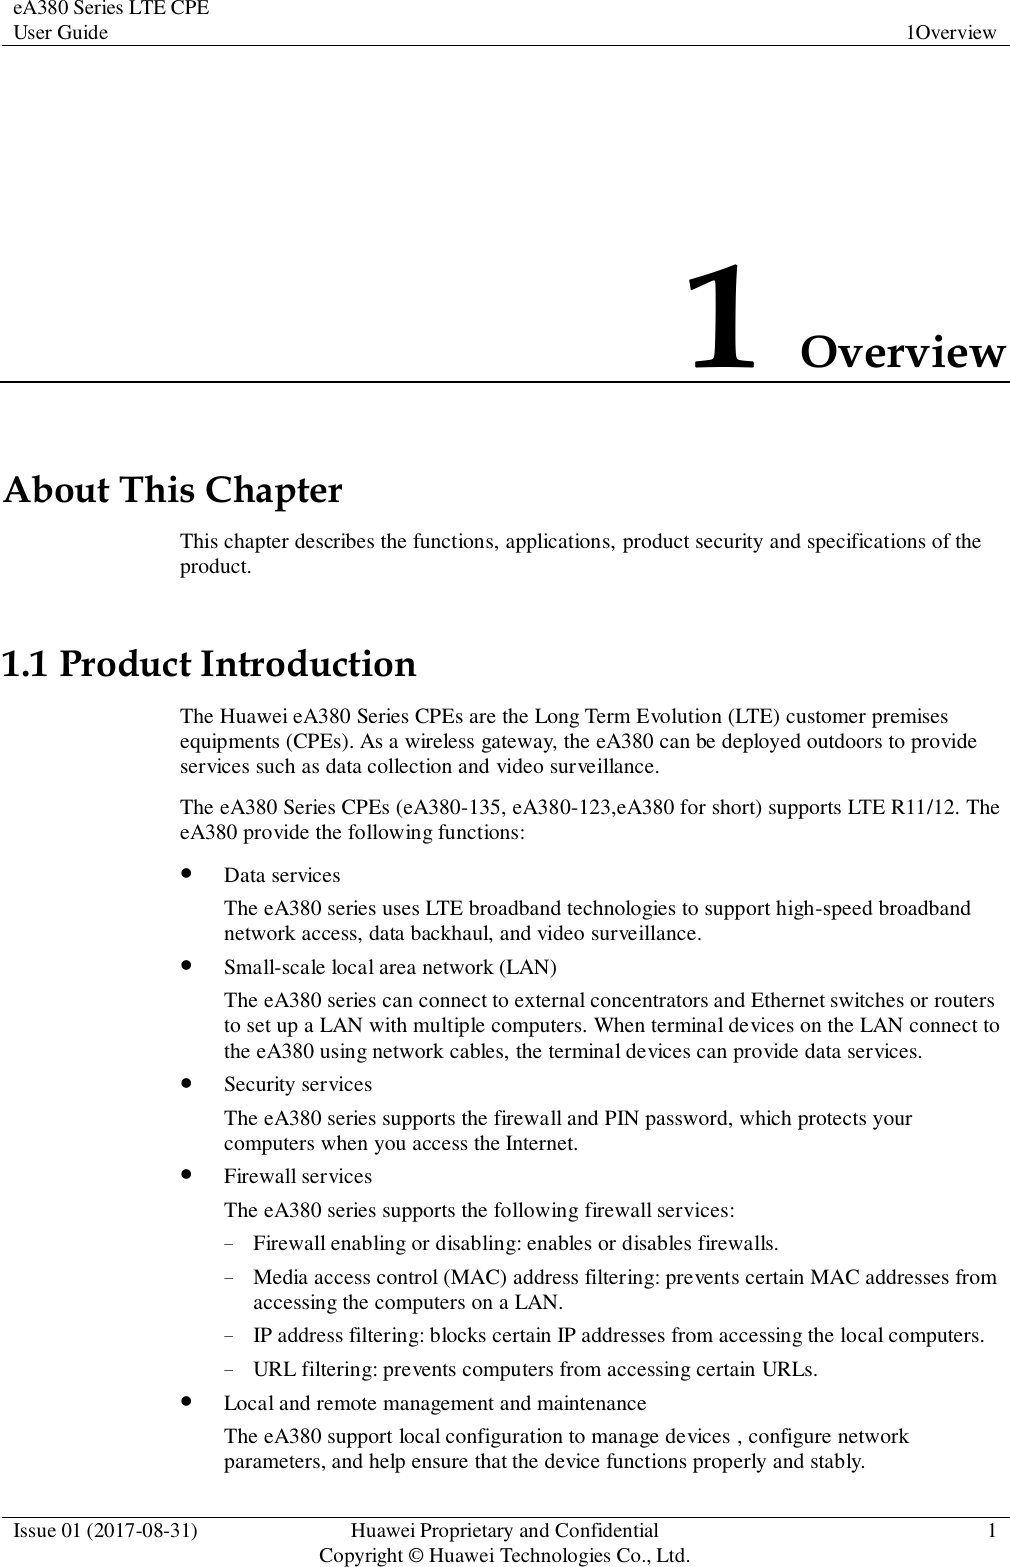 eA380 Series LTE CPE User Guide  1Overview  Issue 01 (2017-08-31)  Huawei Proprietary and Confidential                                     Copyright © Huawei Technologies Co., Ltd.  1  1 Overview About This Chapter This chapter describes the functions, applications, product security and specifications of the product. 1.1 Product Introduction The Huawei eA380 Series CPEs are the Long Term Evolution (LTE) customer premises equipments (CPEs). As a wireless gateway, the eA380 can be deployed outdoors to provide services such as data collection and video surveillance.   The eA380 Series CPEs (eA380-135, eA380-123,eA380 for short) supports LTE R11/12. The eA380 provide the following functions:  Data services The eA380 series uses LTE broadband technologies to support high-speed broadband network access, data backhaul, and video surveillance.  Small-scale local area network (LAN) The eA380 series can connect to external concentrators and Ethernet switches or routers to set up a LAN with multiple computers. When terminal devices on the LAN connect to the eA380 using network cables, the terminal devices can provide data services.    Security services The eA380 series supports the firewall and PIN password, which protects your computers when you access the Internet.  Firewall services The eA380 series supports the following firewall services: − Firewall enabling or disabling: enables or disables firewalls. − Media access control (MAC) address filtering: prevents certain MAC addresses from accessing the computers on a LAN. − IP address filtering: blocks certain IP addresses from accessing the local computers. − URL filtering: prevents computers from accessing certain URLs.  Local and remote management and maintenance The eA380 support local configuration to manage devices , configure network parameters, and help ensure that the device functions properly and stably. 